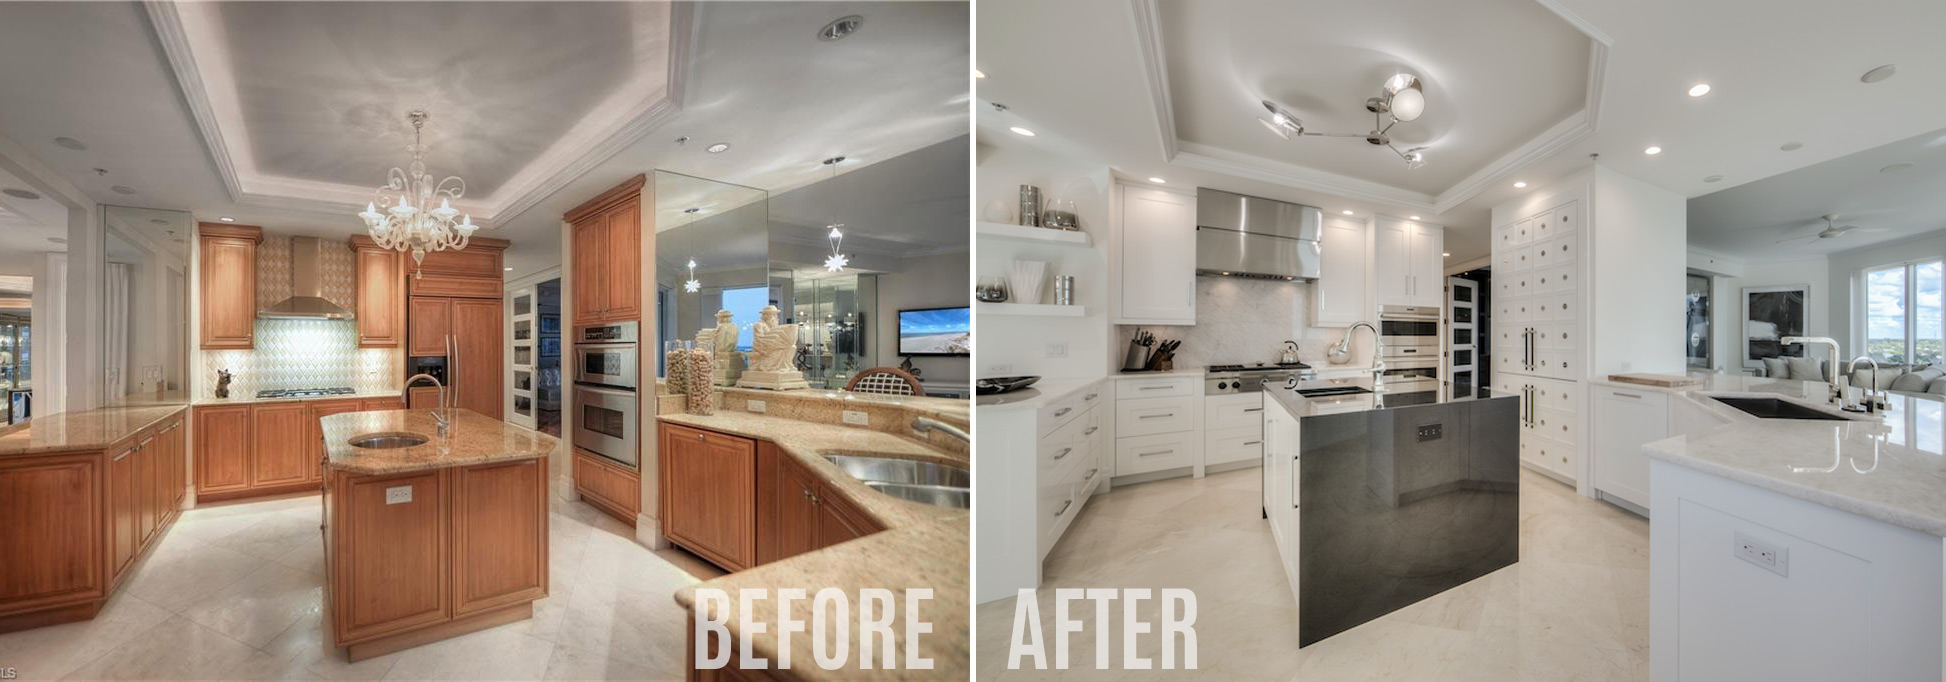 Before and after kitchen renovation by Diamond Custom Homes